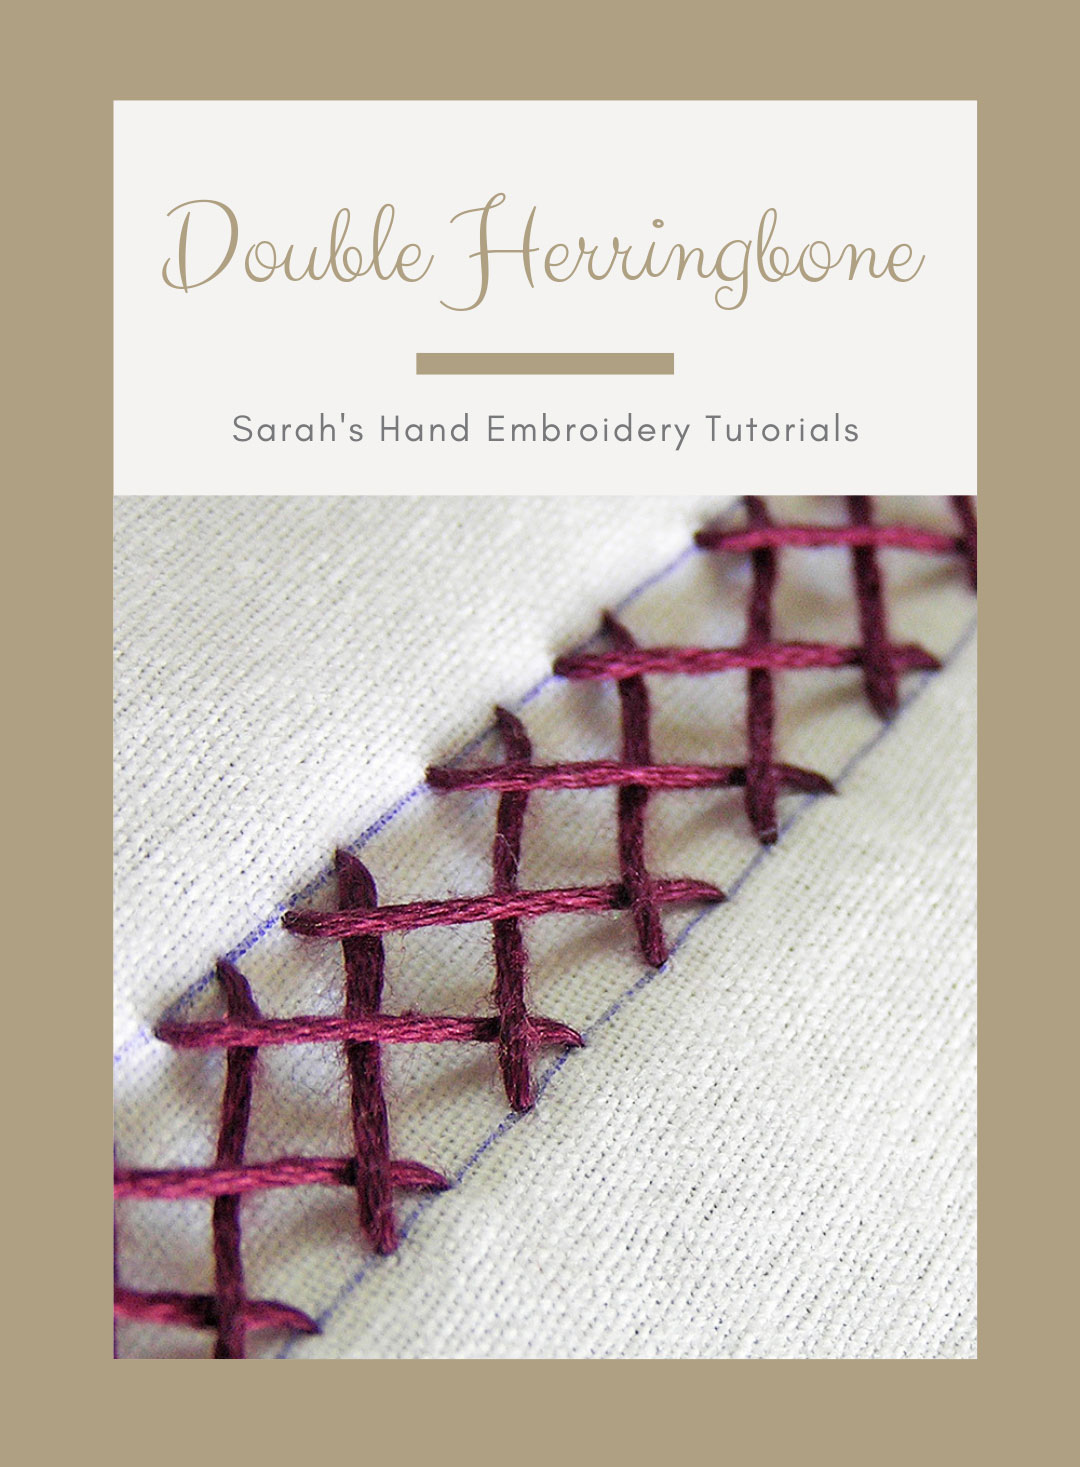 How to do Double Cross Stitch - Sarah's Hand Embroidery Tutorials